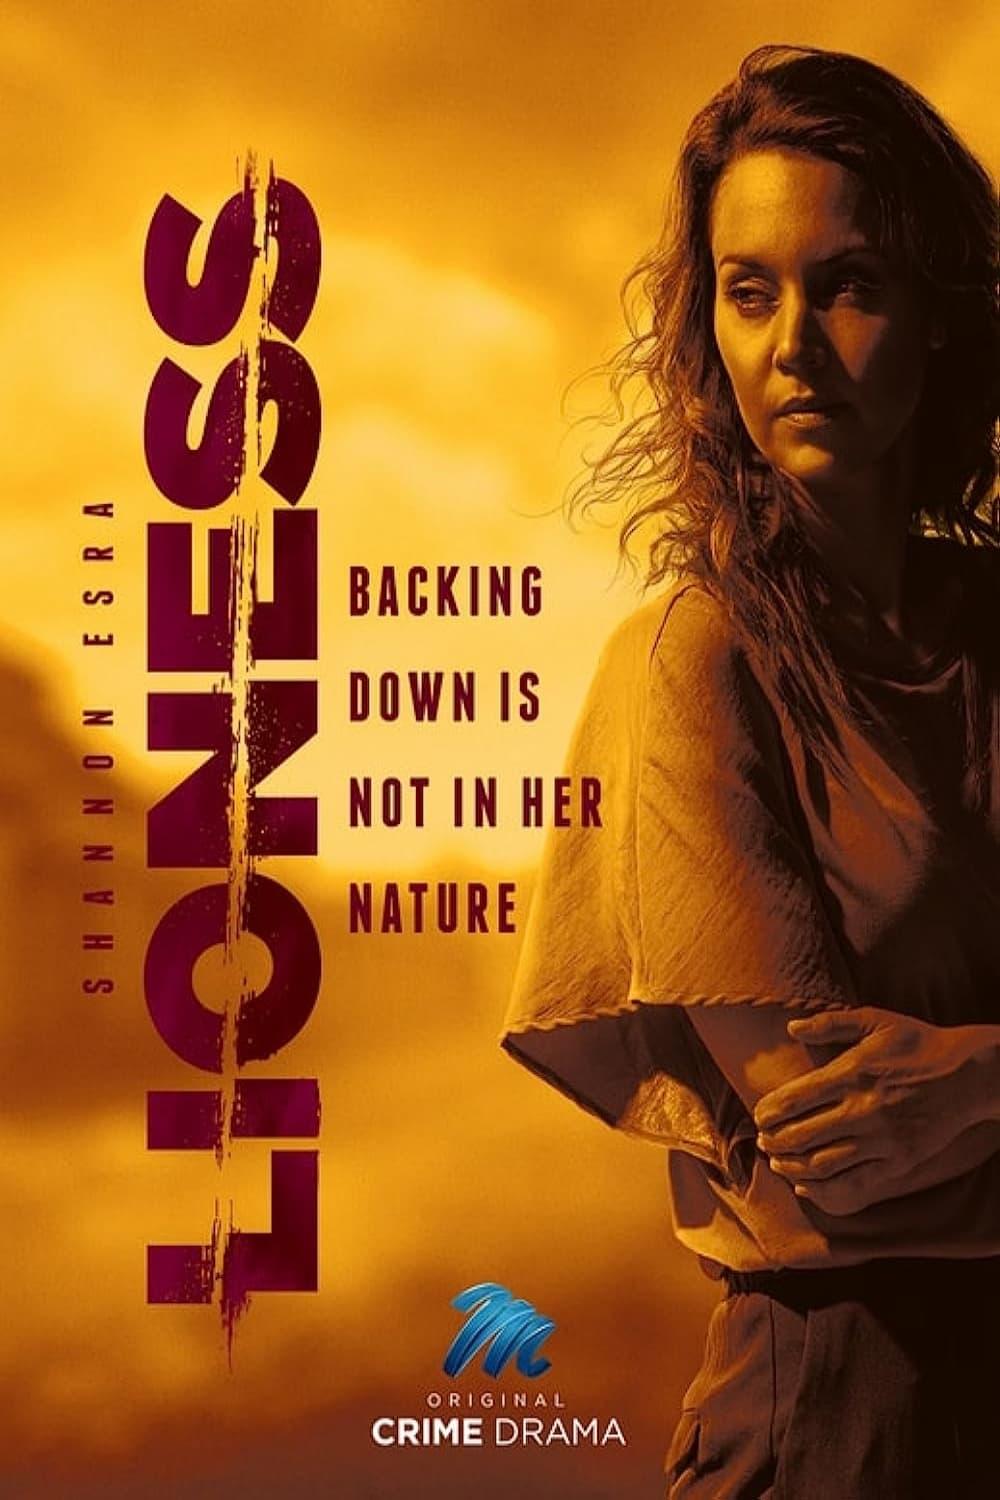 Lioness poster